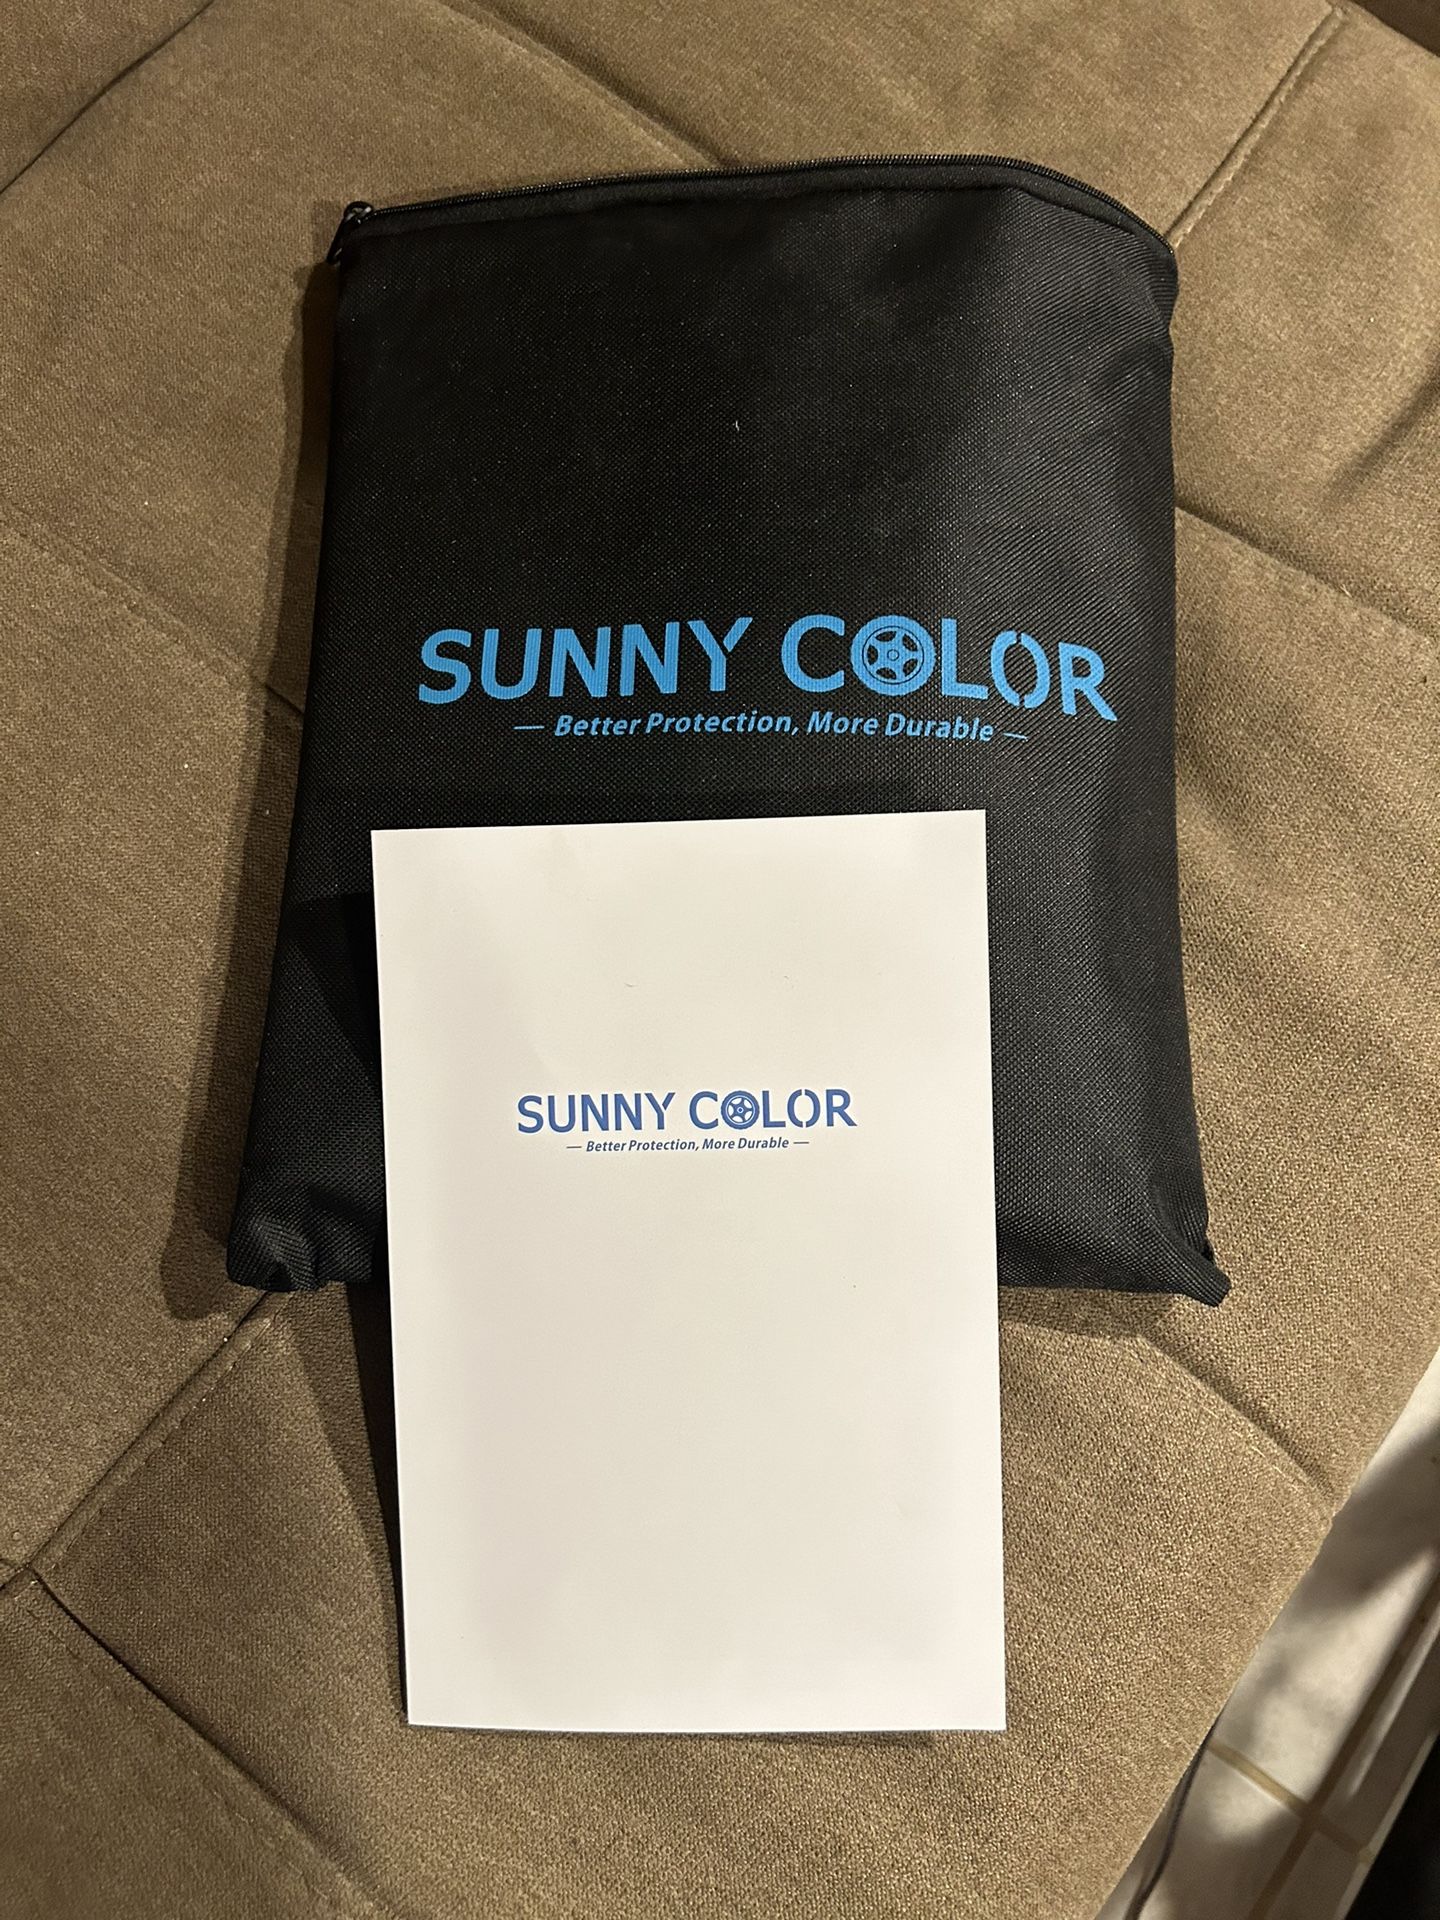 Sunny color Extra Large Windproof Car Windshield Cover (Best for Ice)